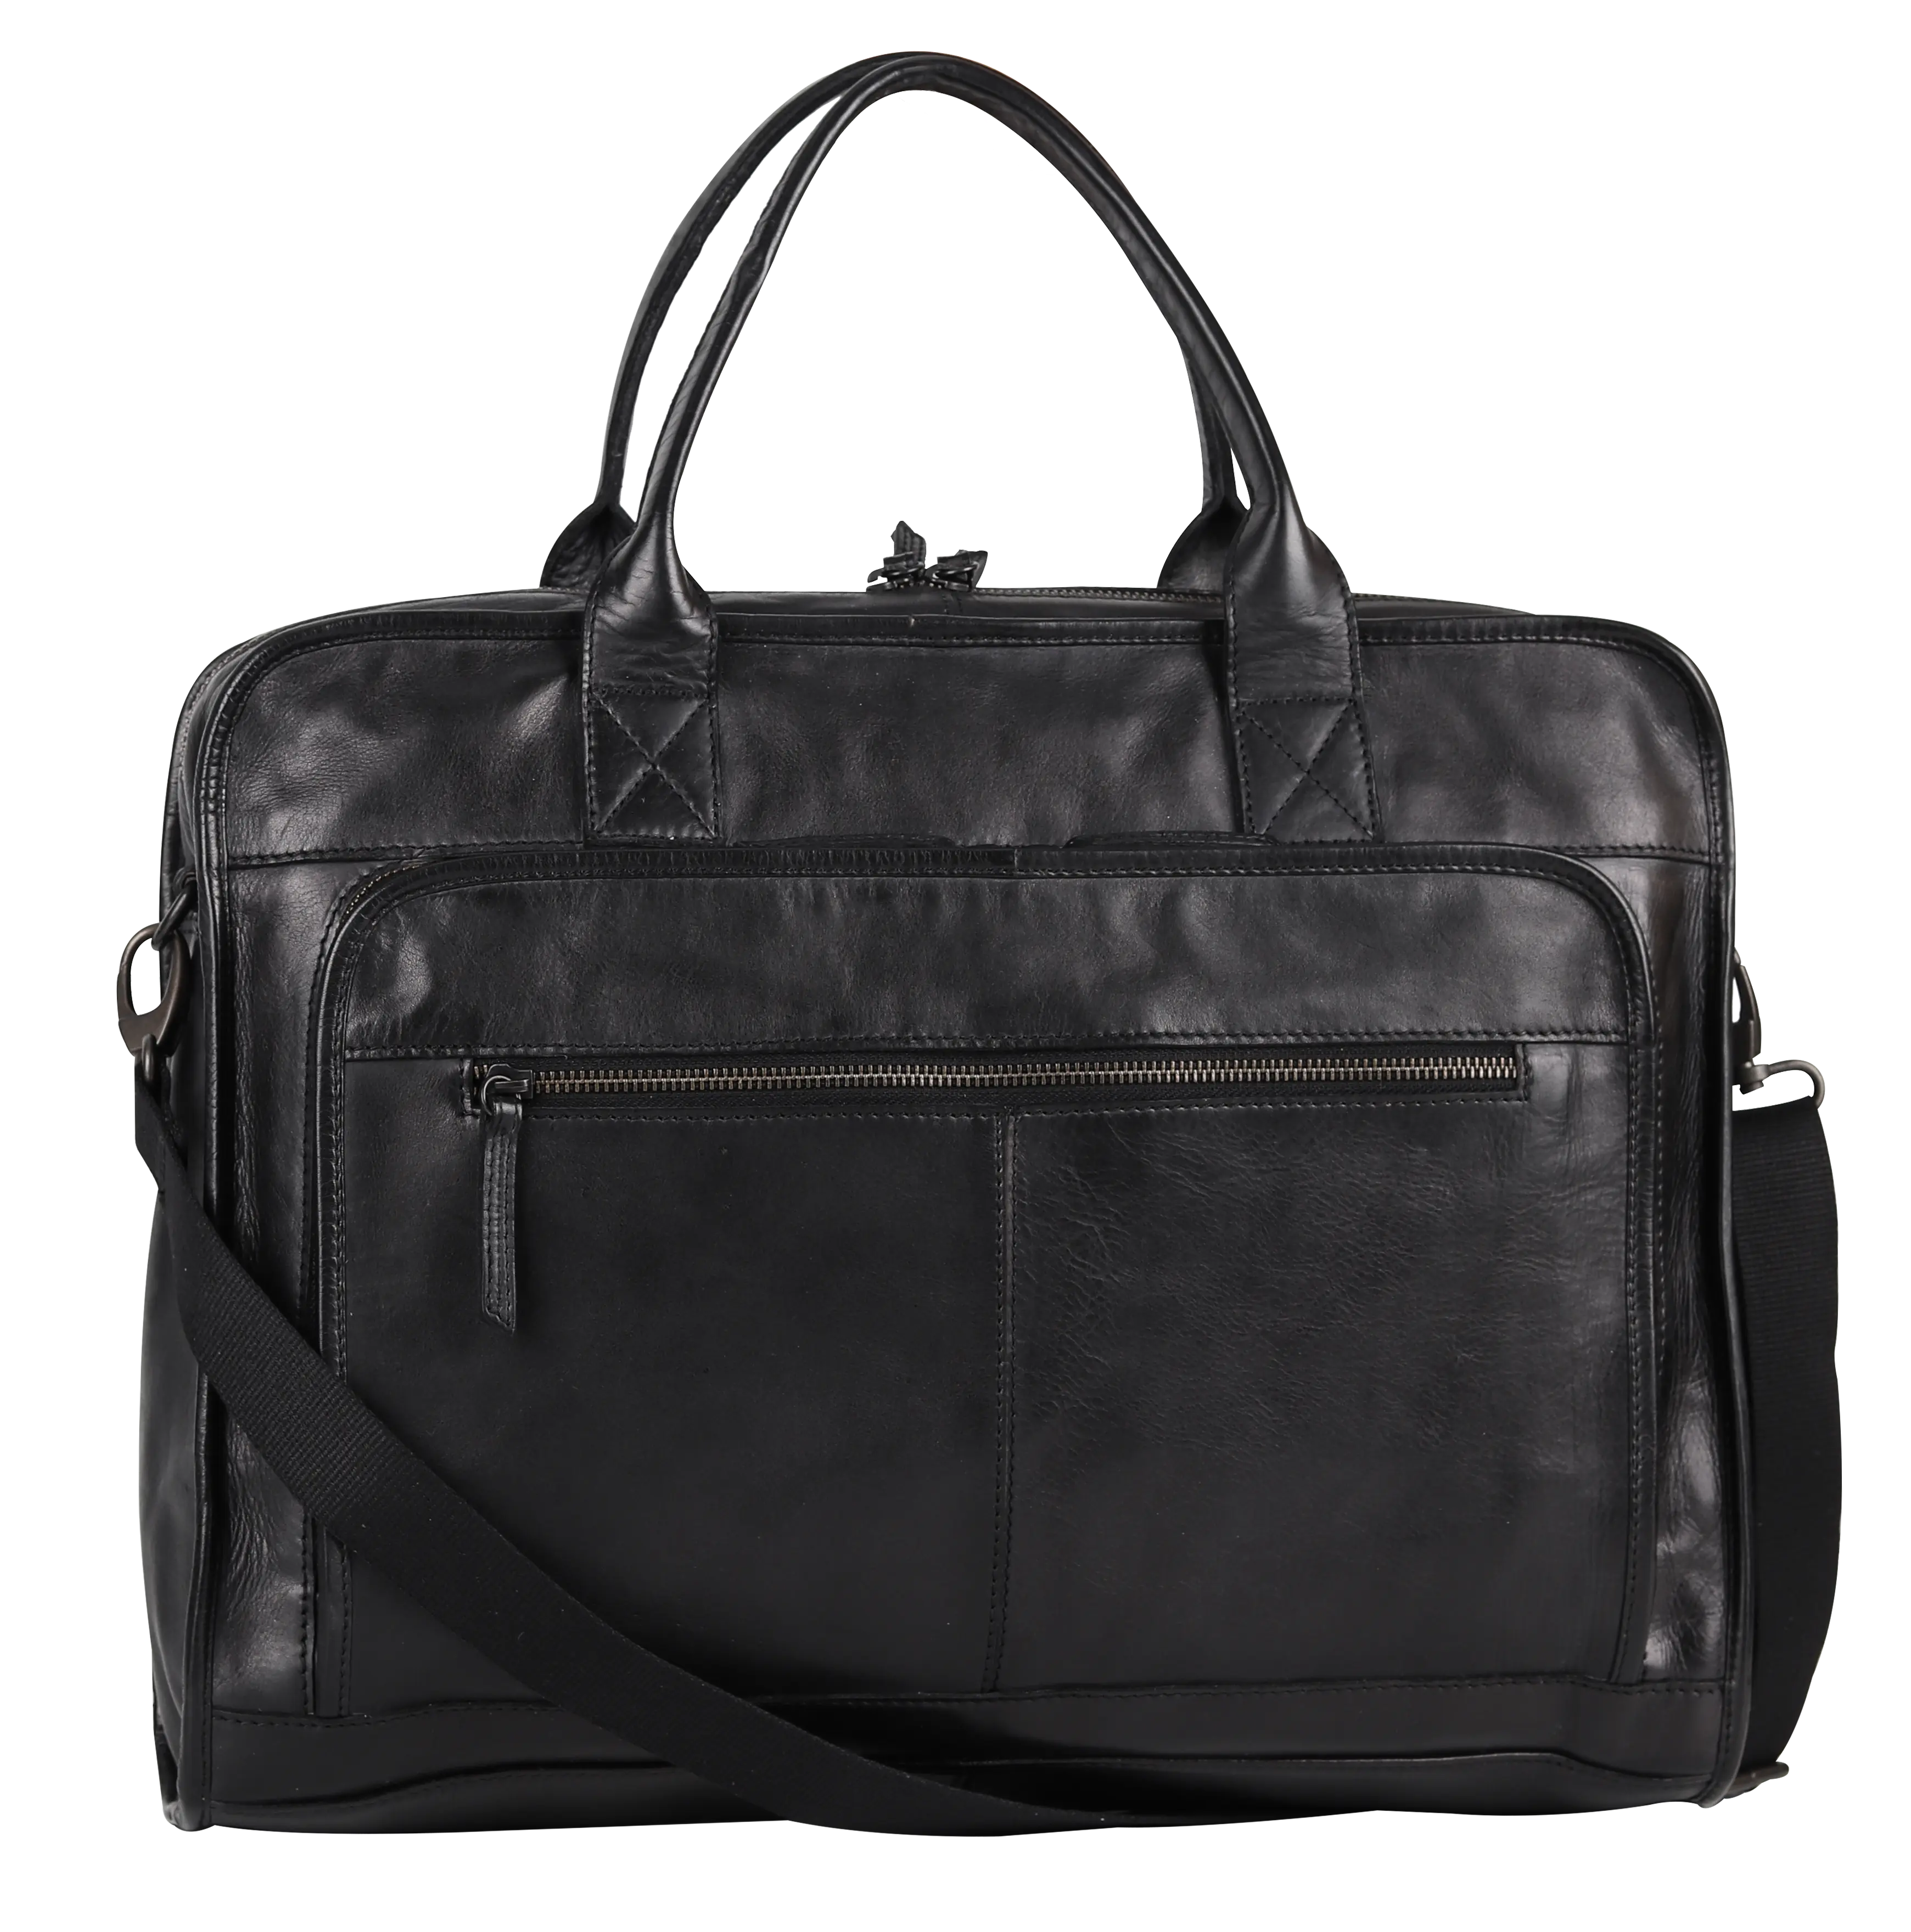 BOL/Open Road Two Handle Messenger Laptop Leather Bag Backpacks & Messenger Bags Boutique of Leathers/Open Road